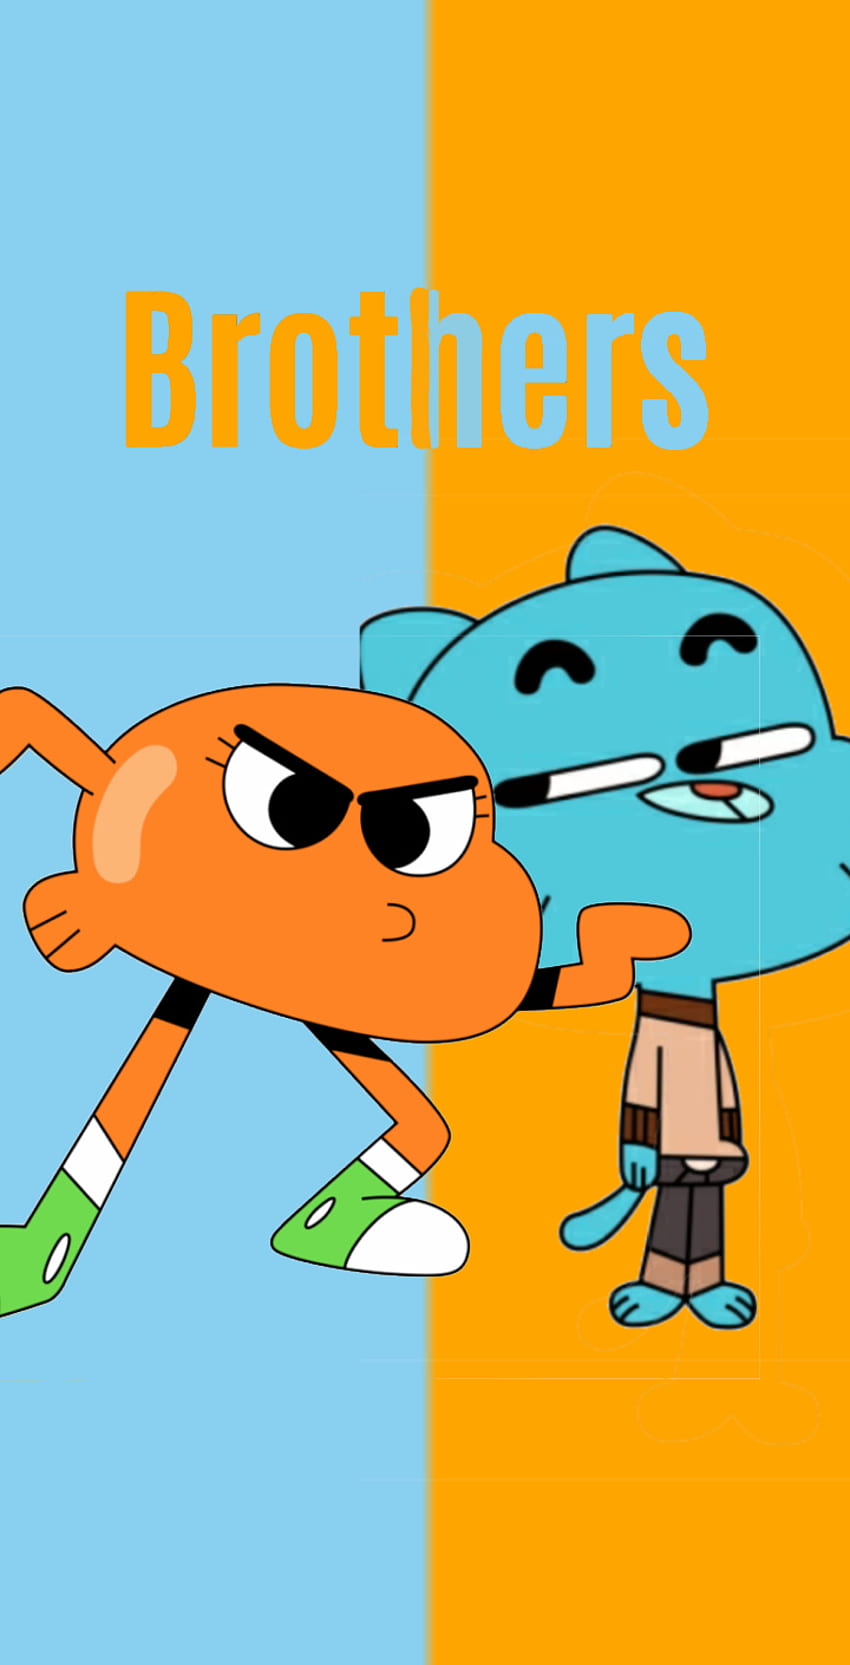 Top more than 62 gumball and darwin wallpaper iphone best - in.cdgdbentre